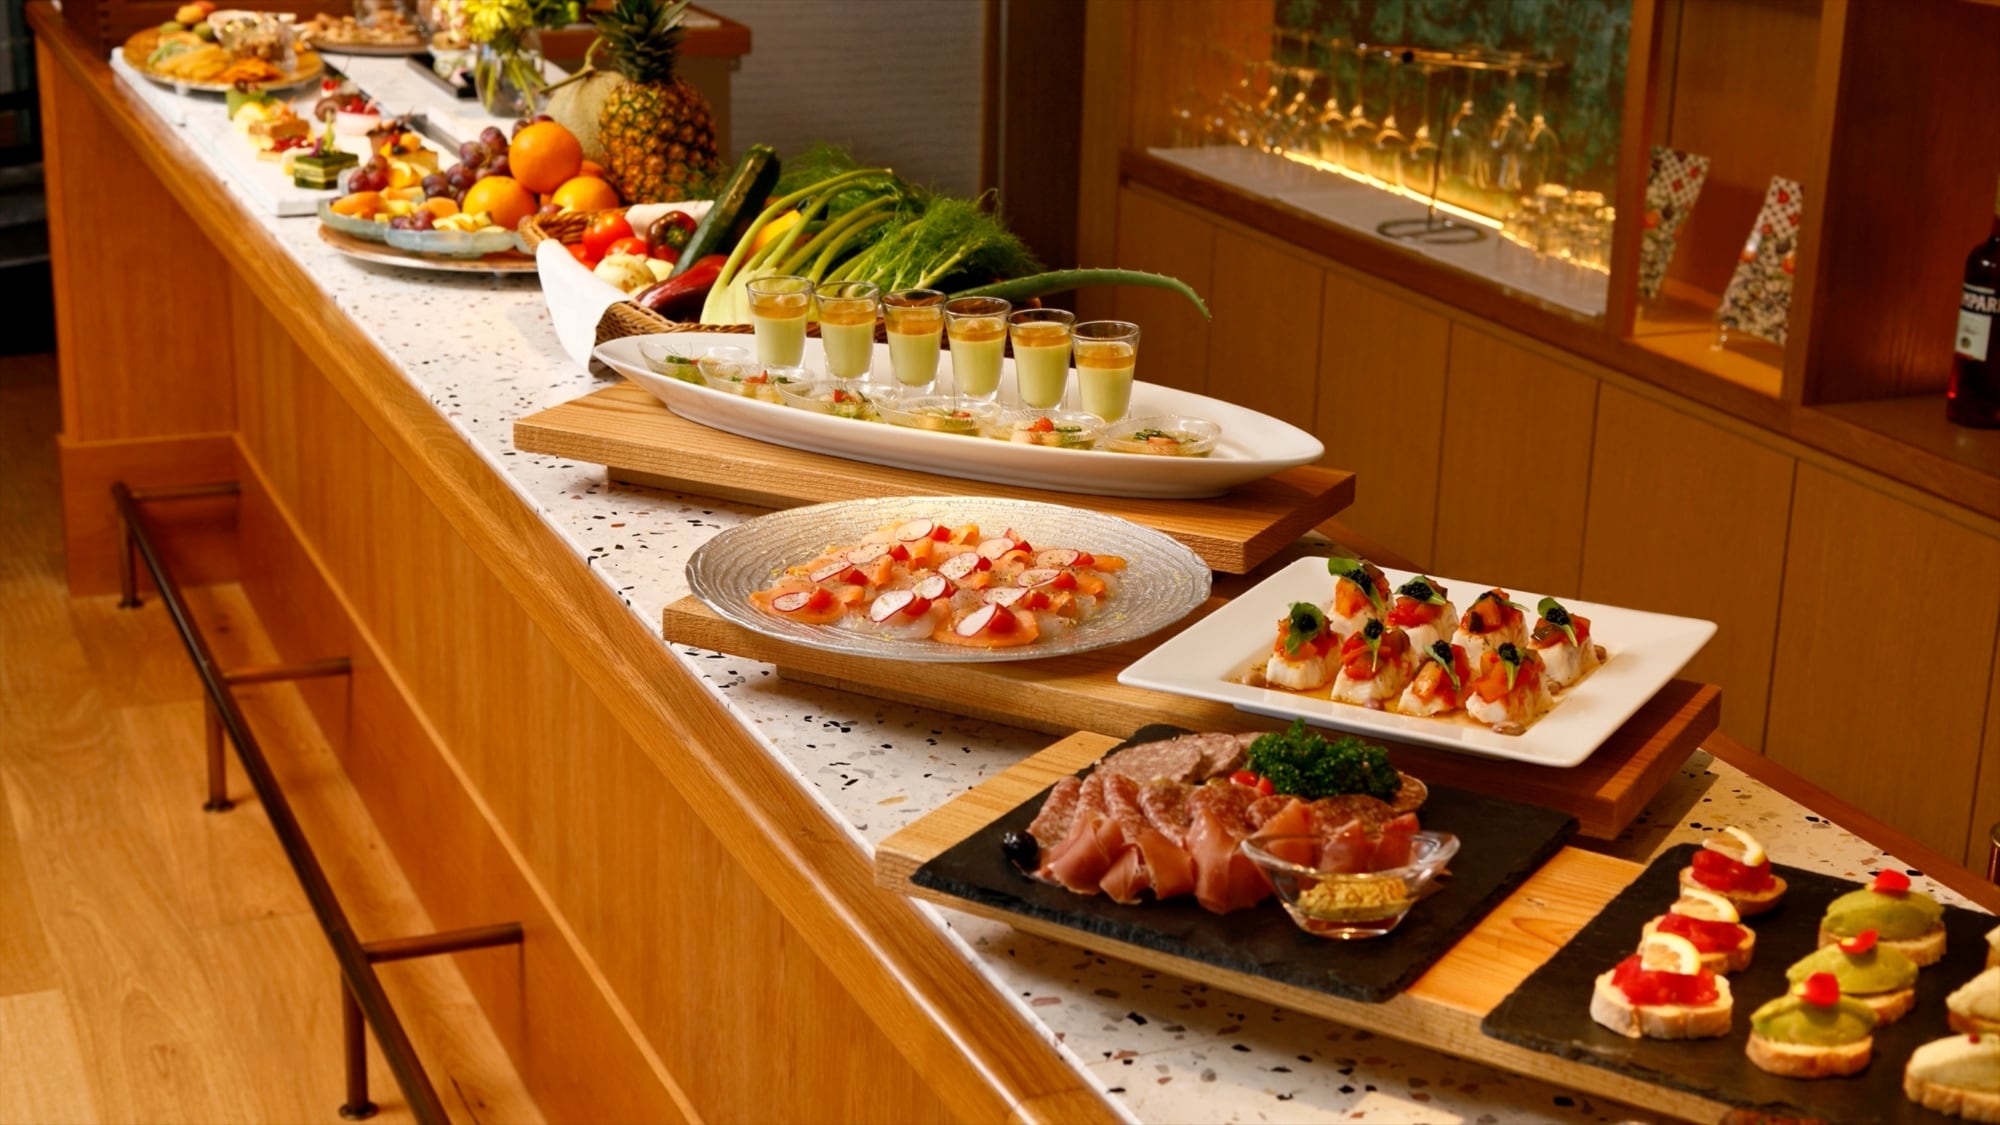 [The Club Lounge] Several types of light snacks are available in the lounge.